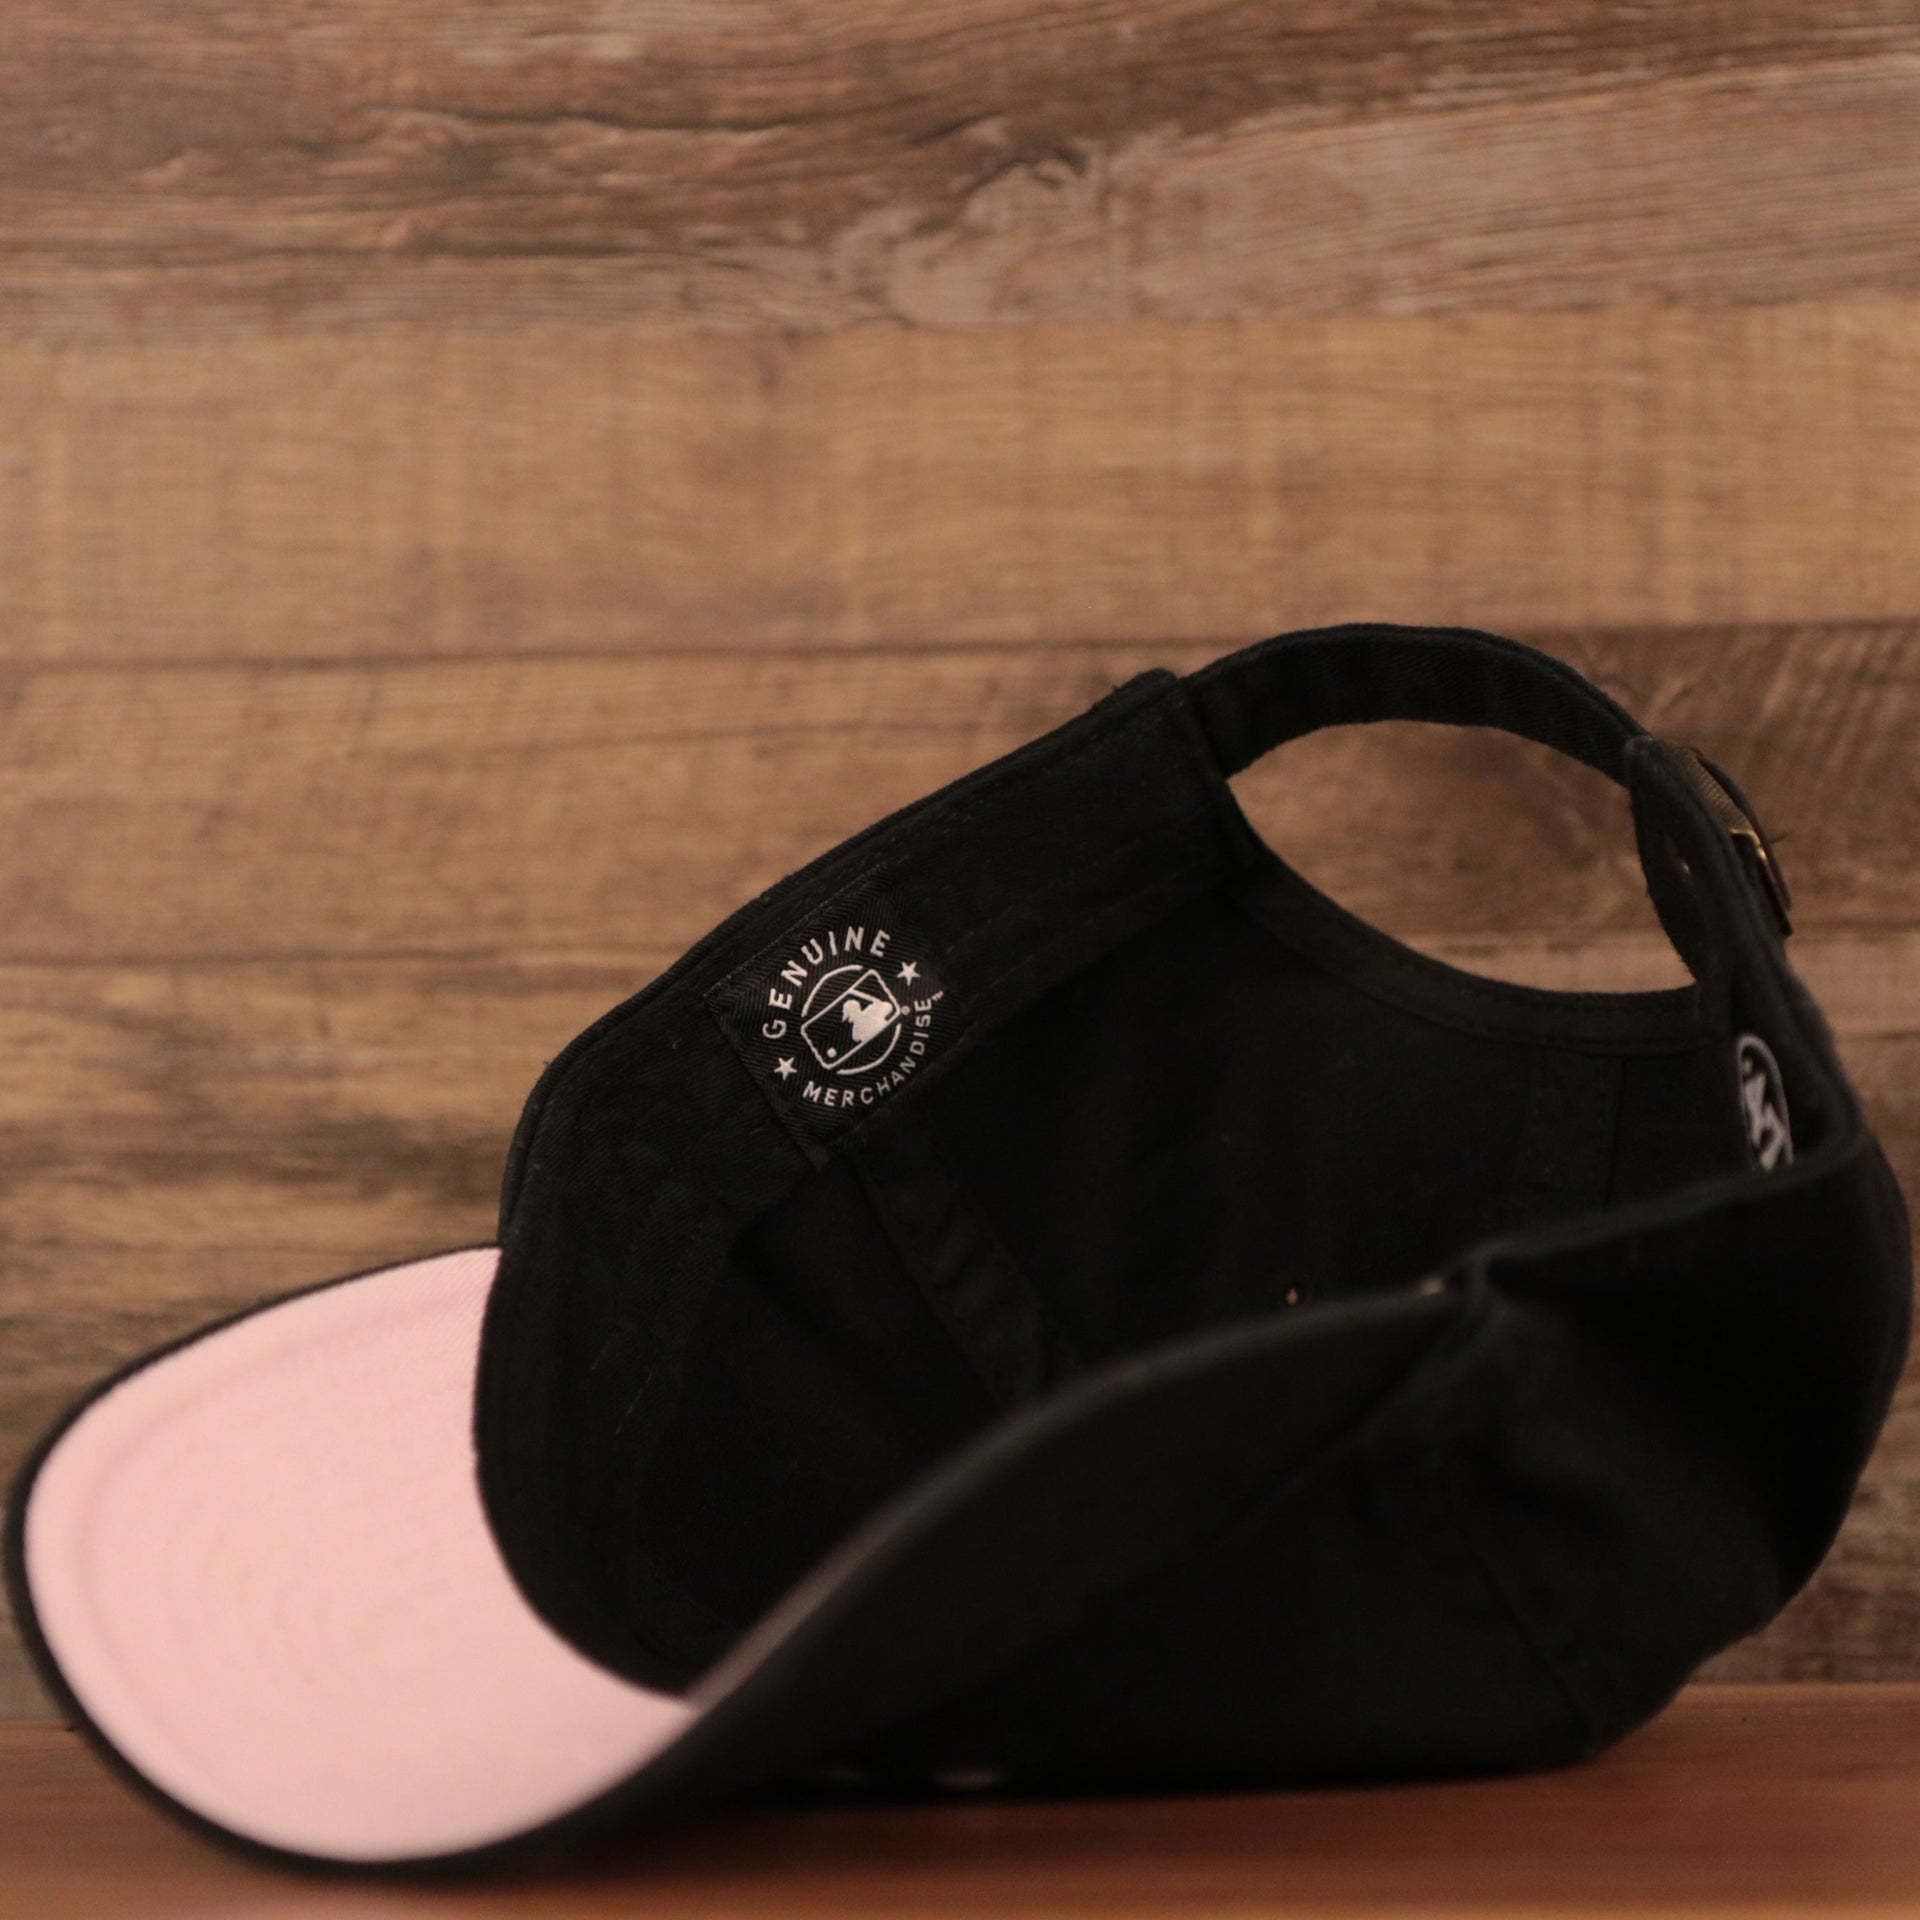 The genuine merchandise of the black Yankees pink bottom adjustable dad hat by 47 Brand.